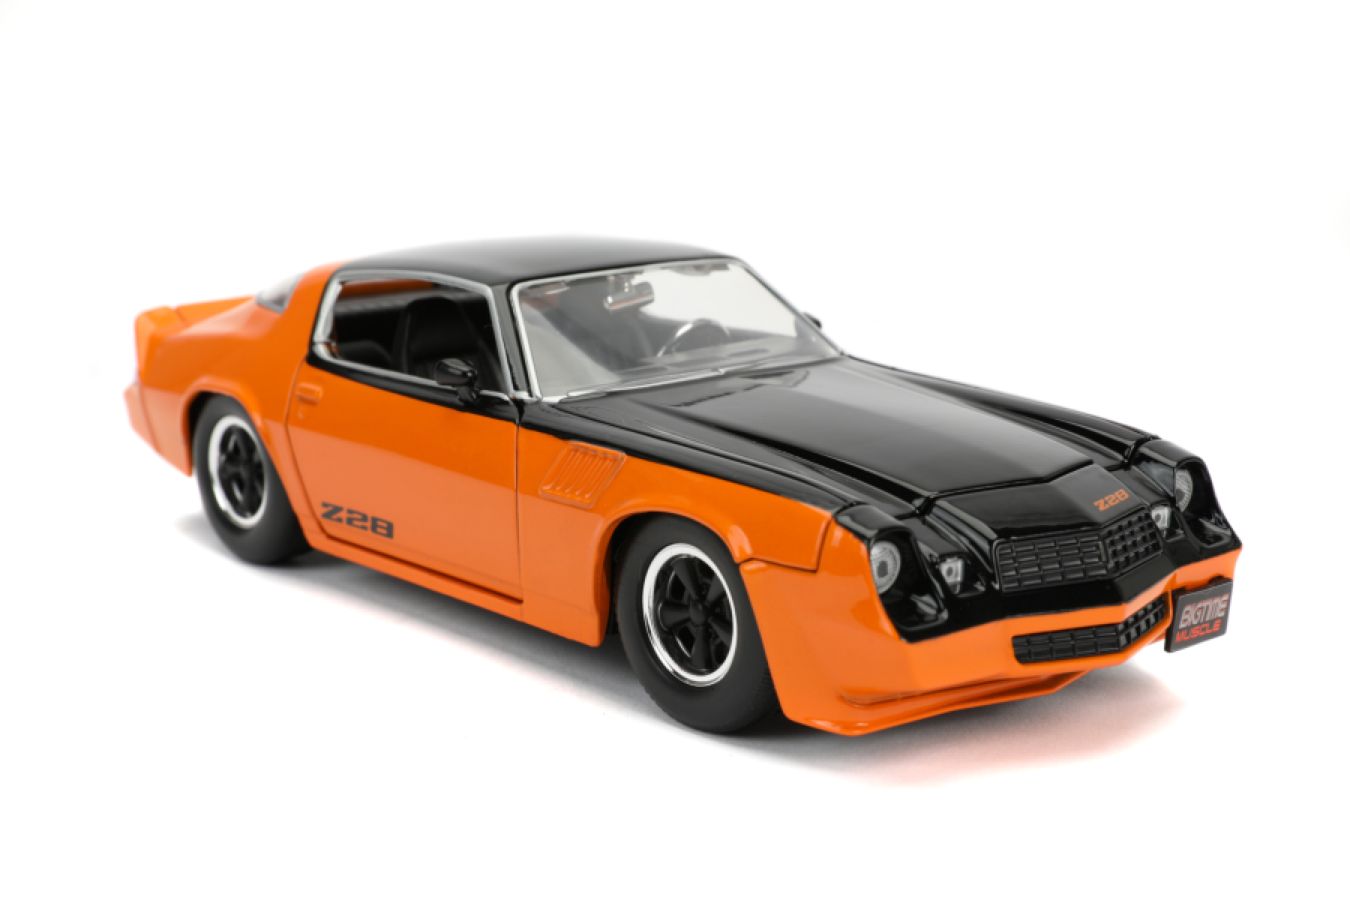 Big Time Muscle - Chevrolet Camaro Z28 1979 1:24 Scale